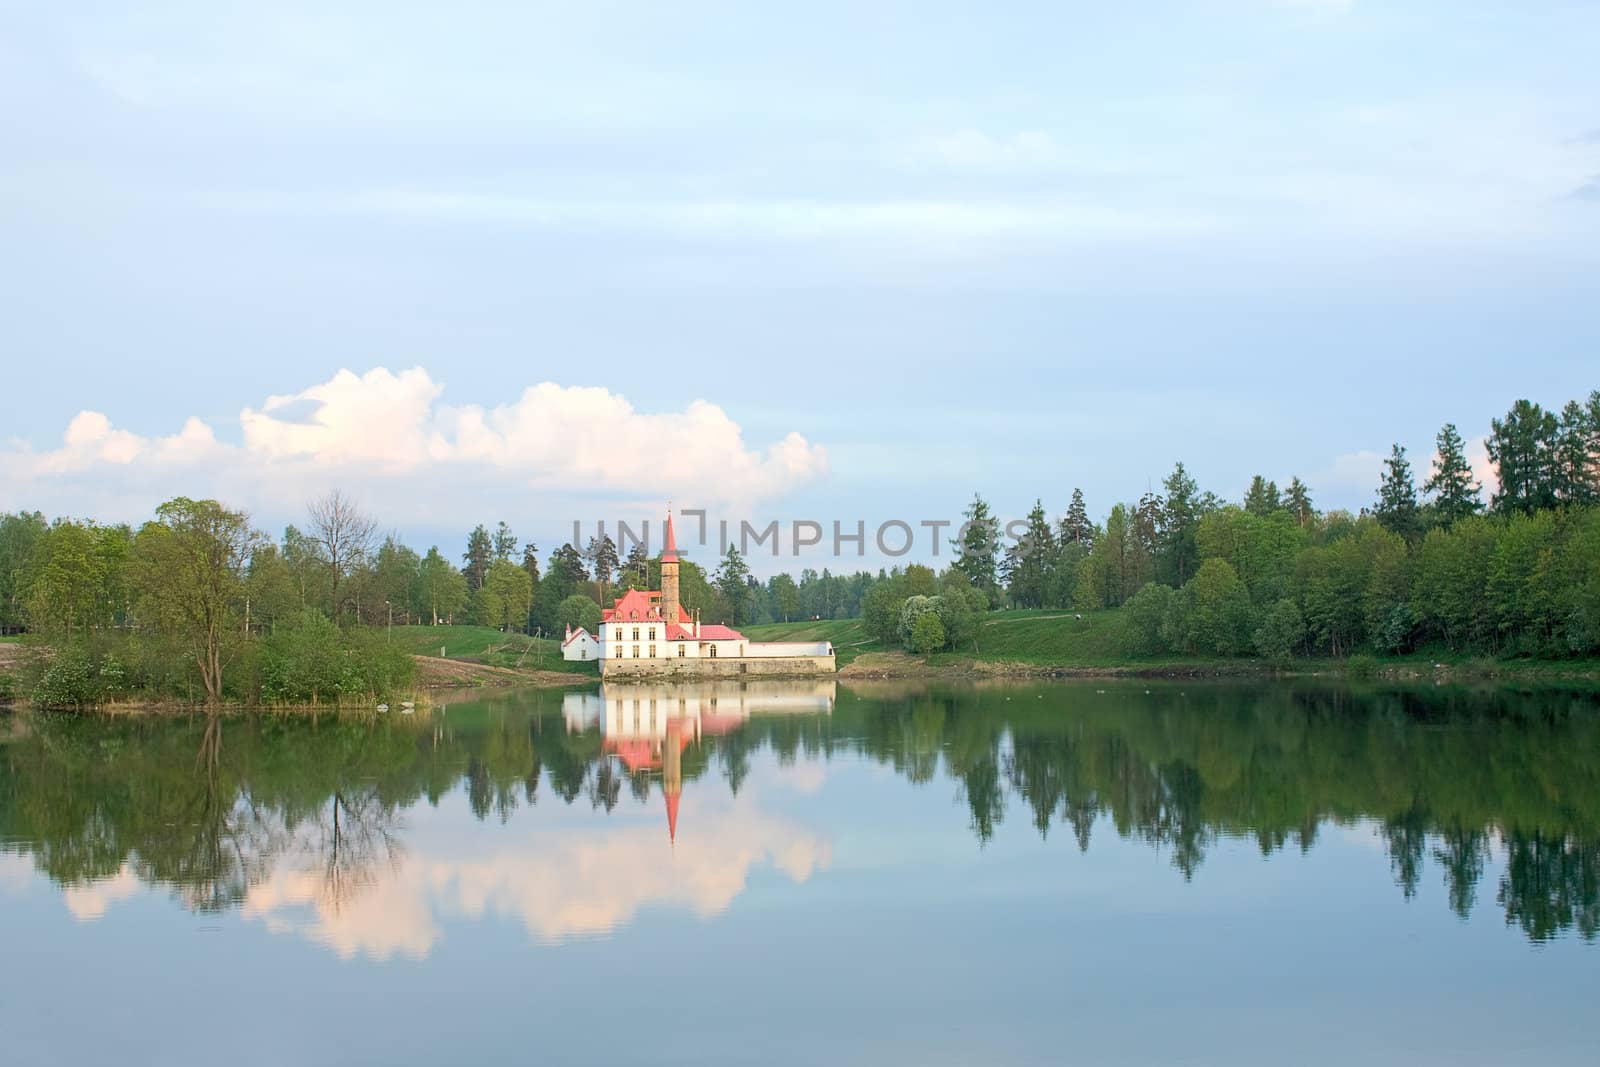 On the shore of the lake is visible Priory Palace and its reflection in the water, Gatchina, Russia.